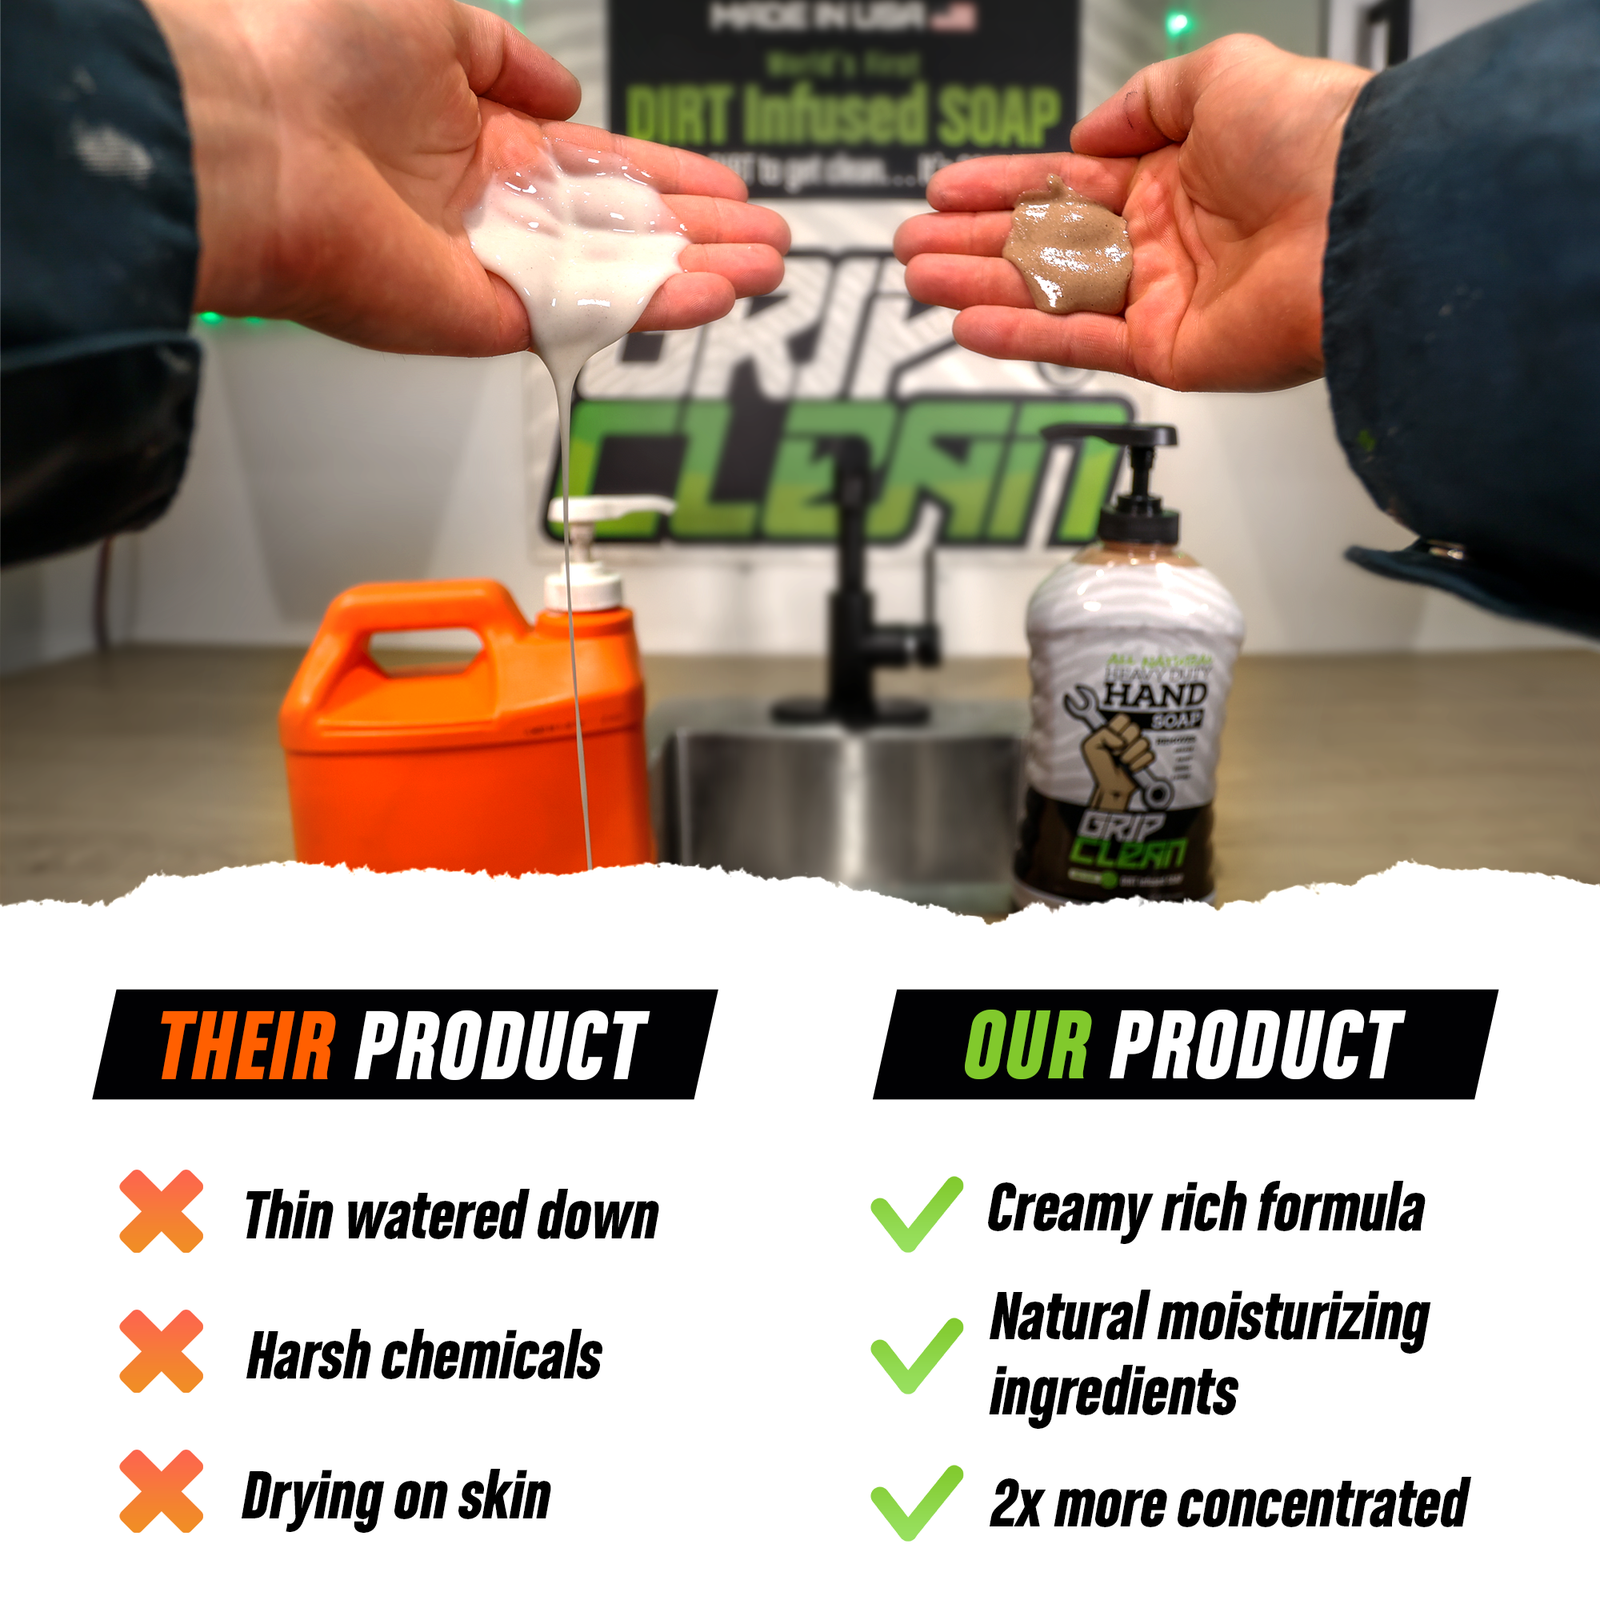 Grip Clean  Ultra Heavy Duty Hand Cleaner For Auto Mechanics